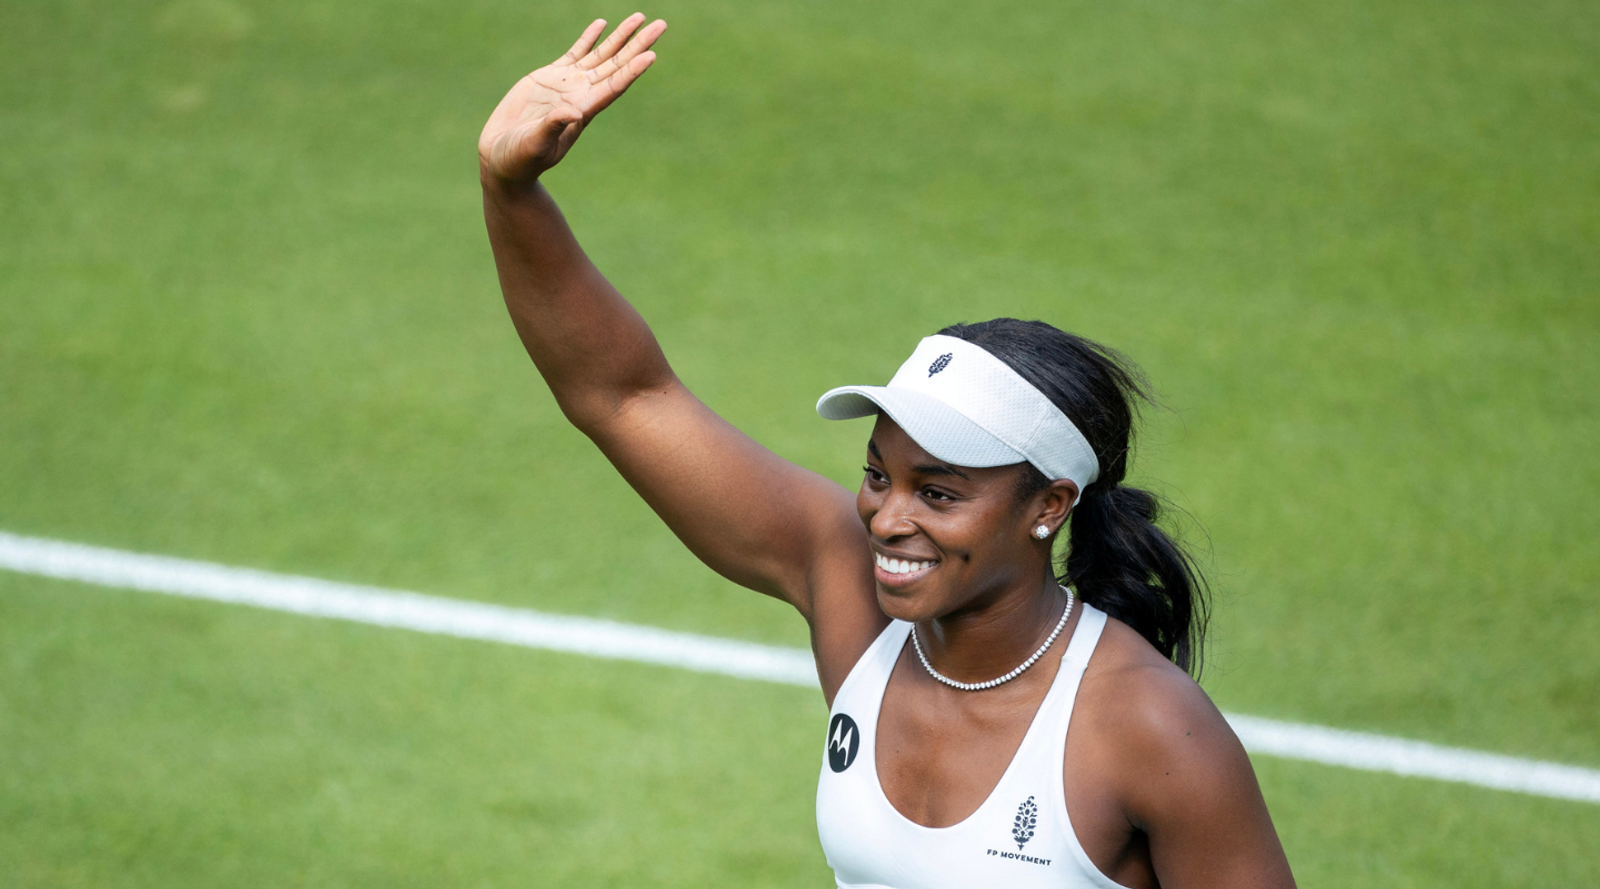 Cornerstone and Sloane Stephens: Serving learning to more people